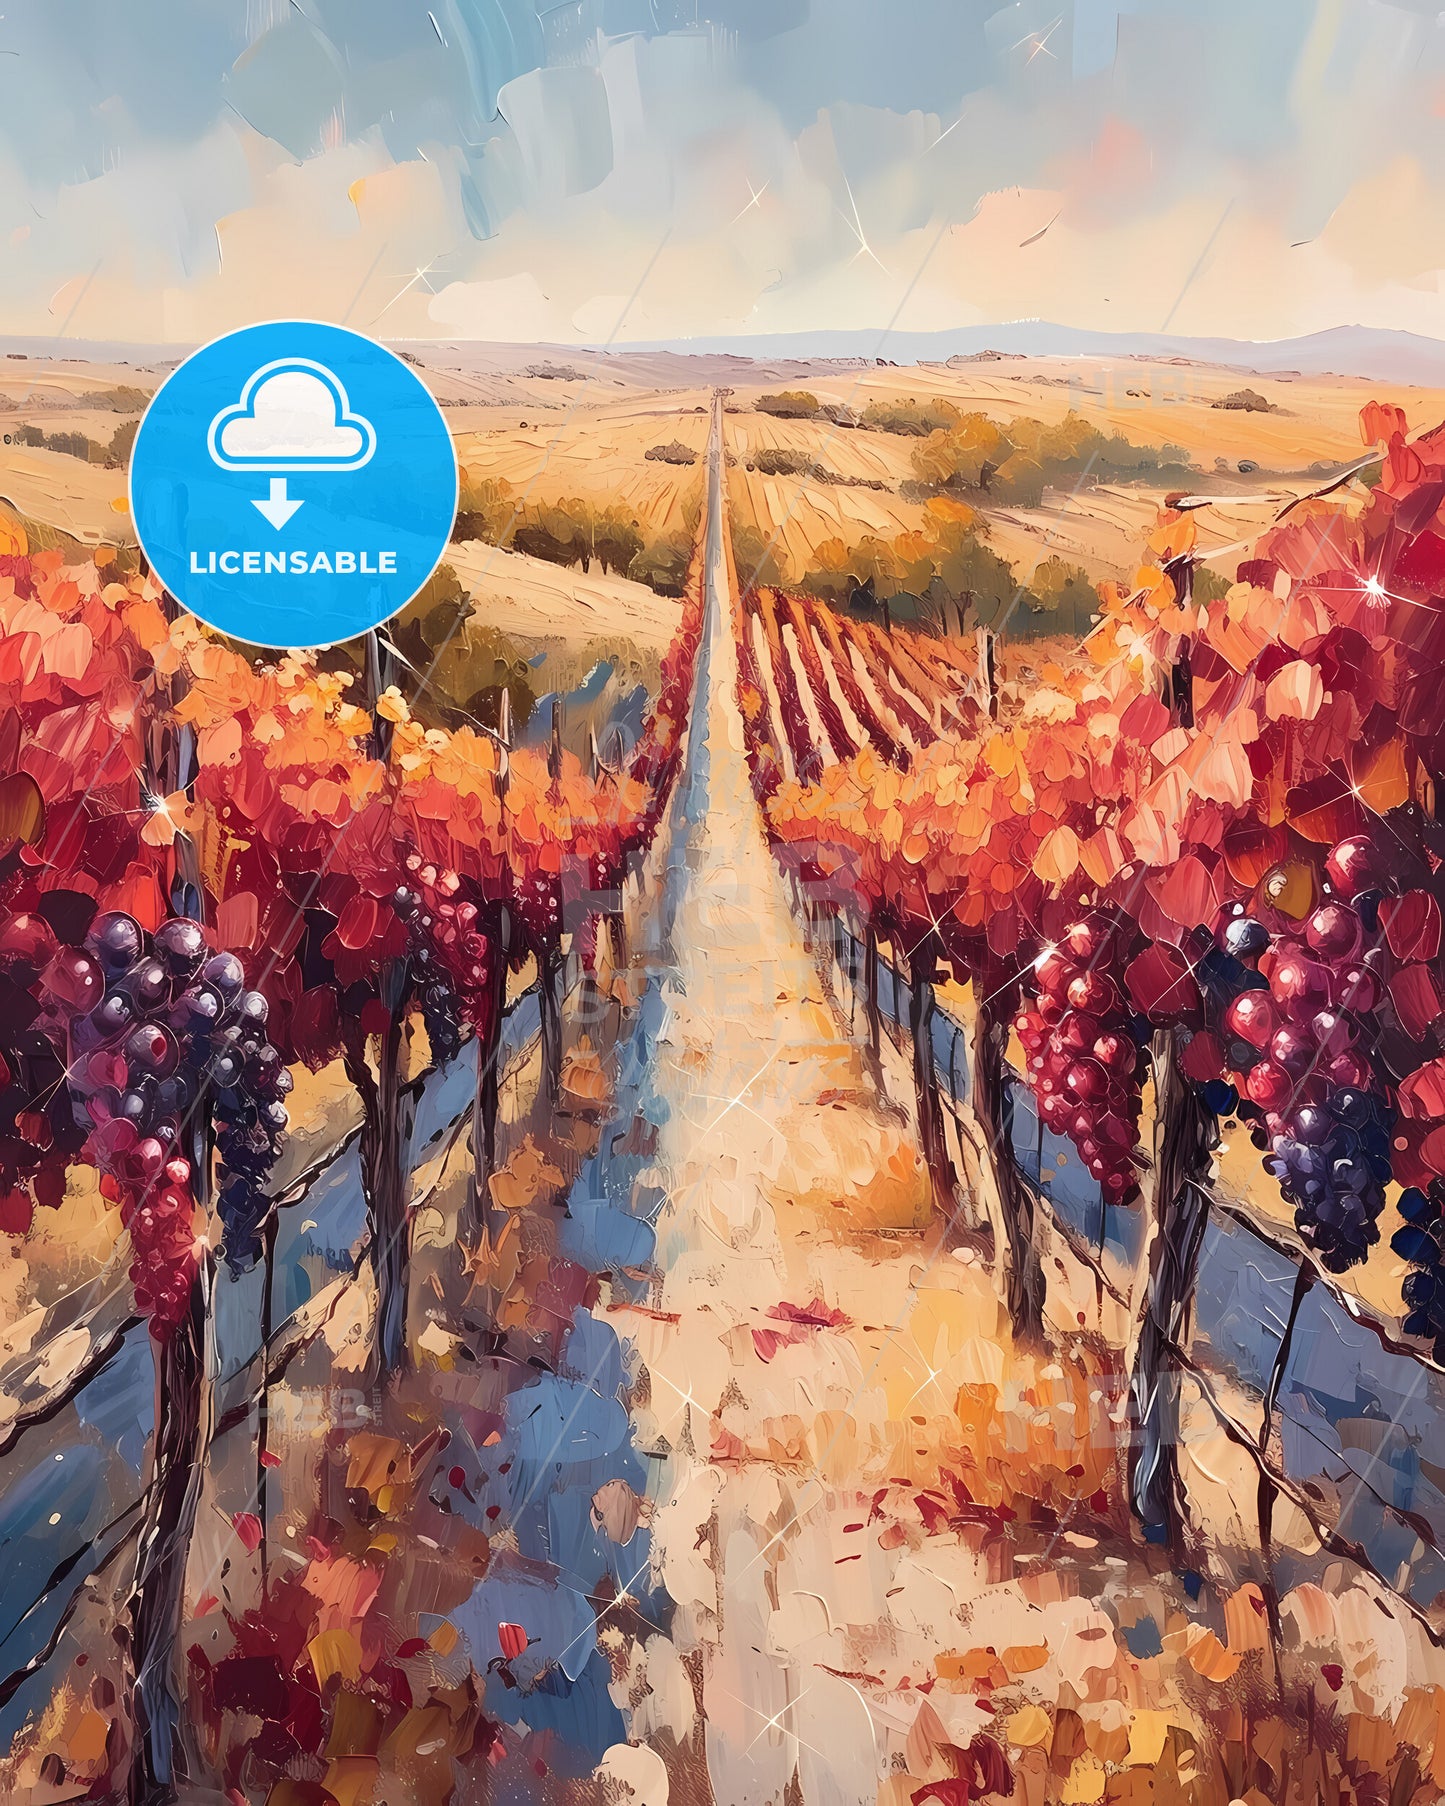 Central Valley, Argentina - A Painting Of A Vineyard